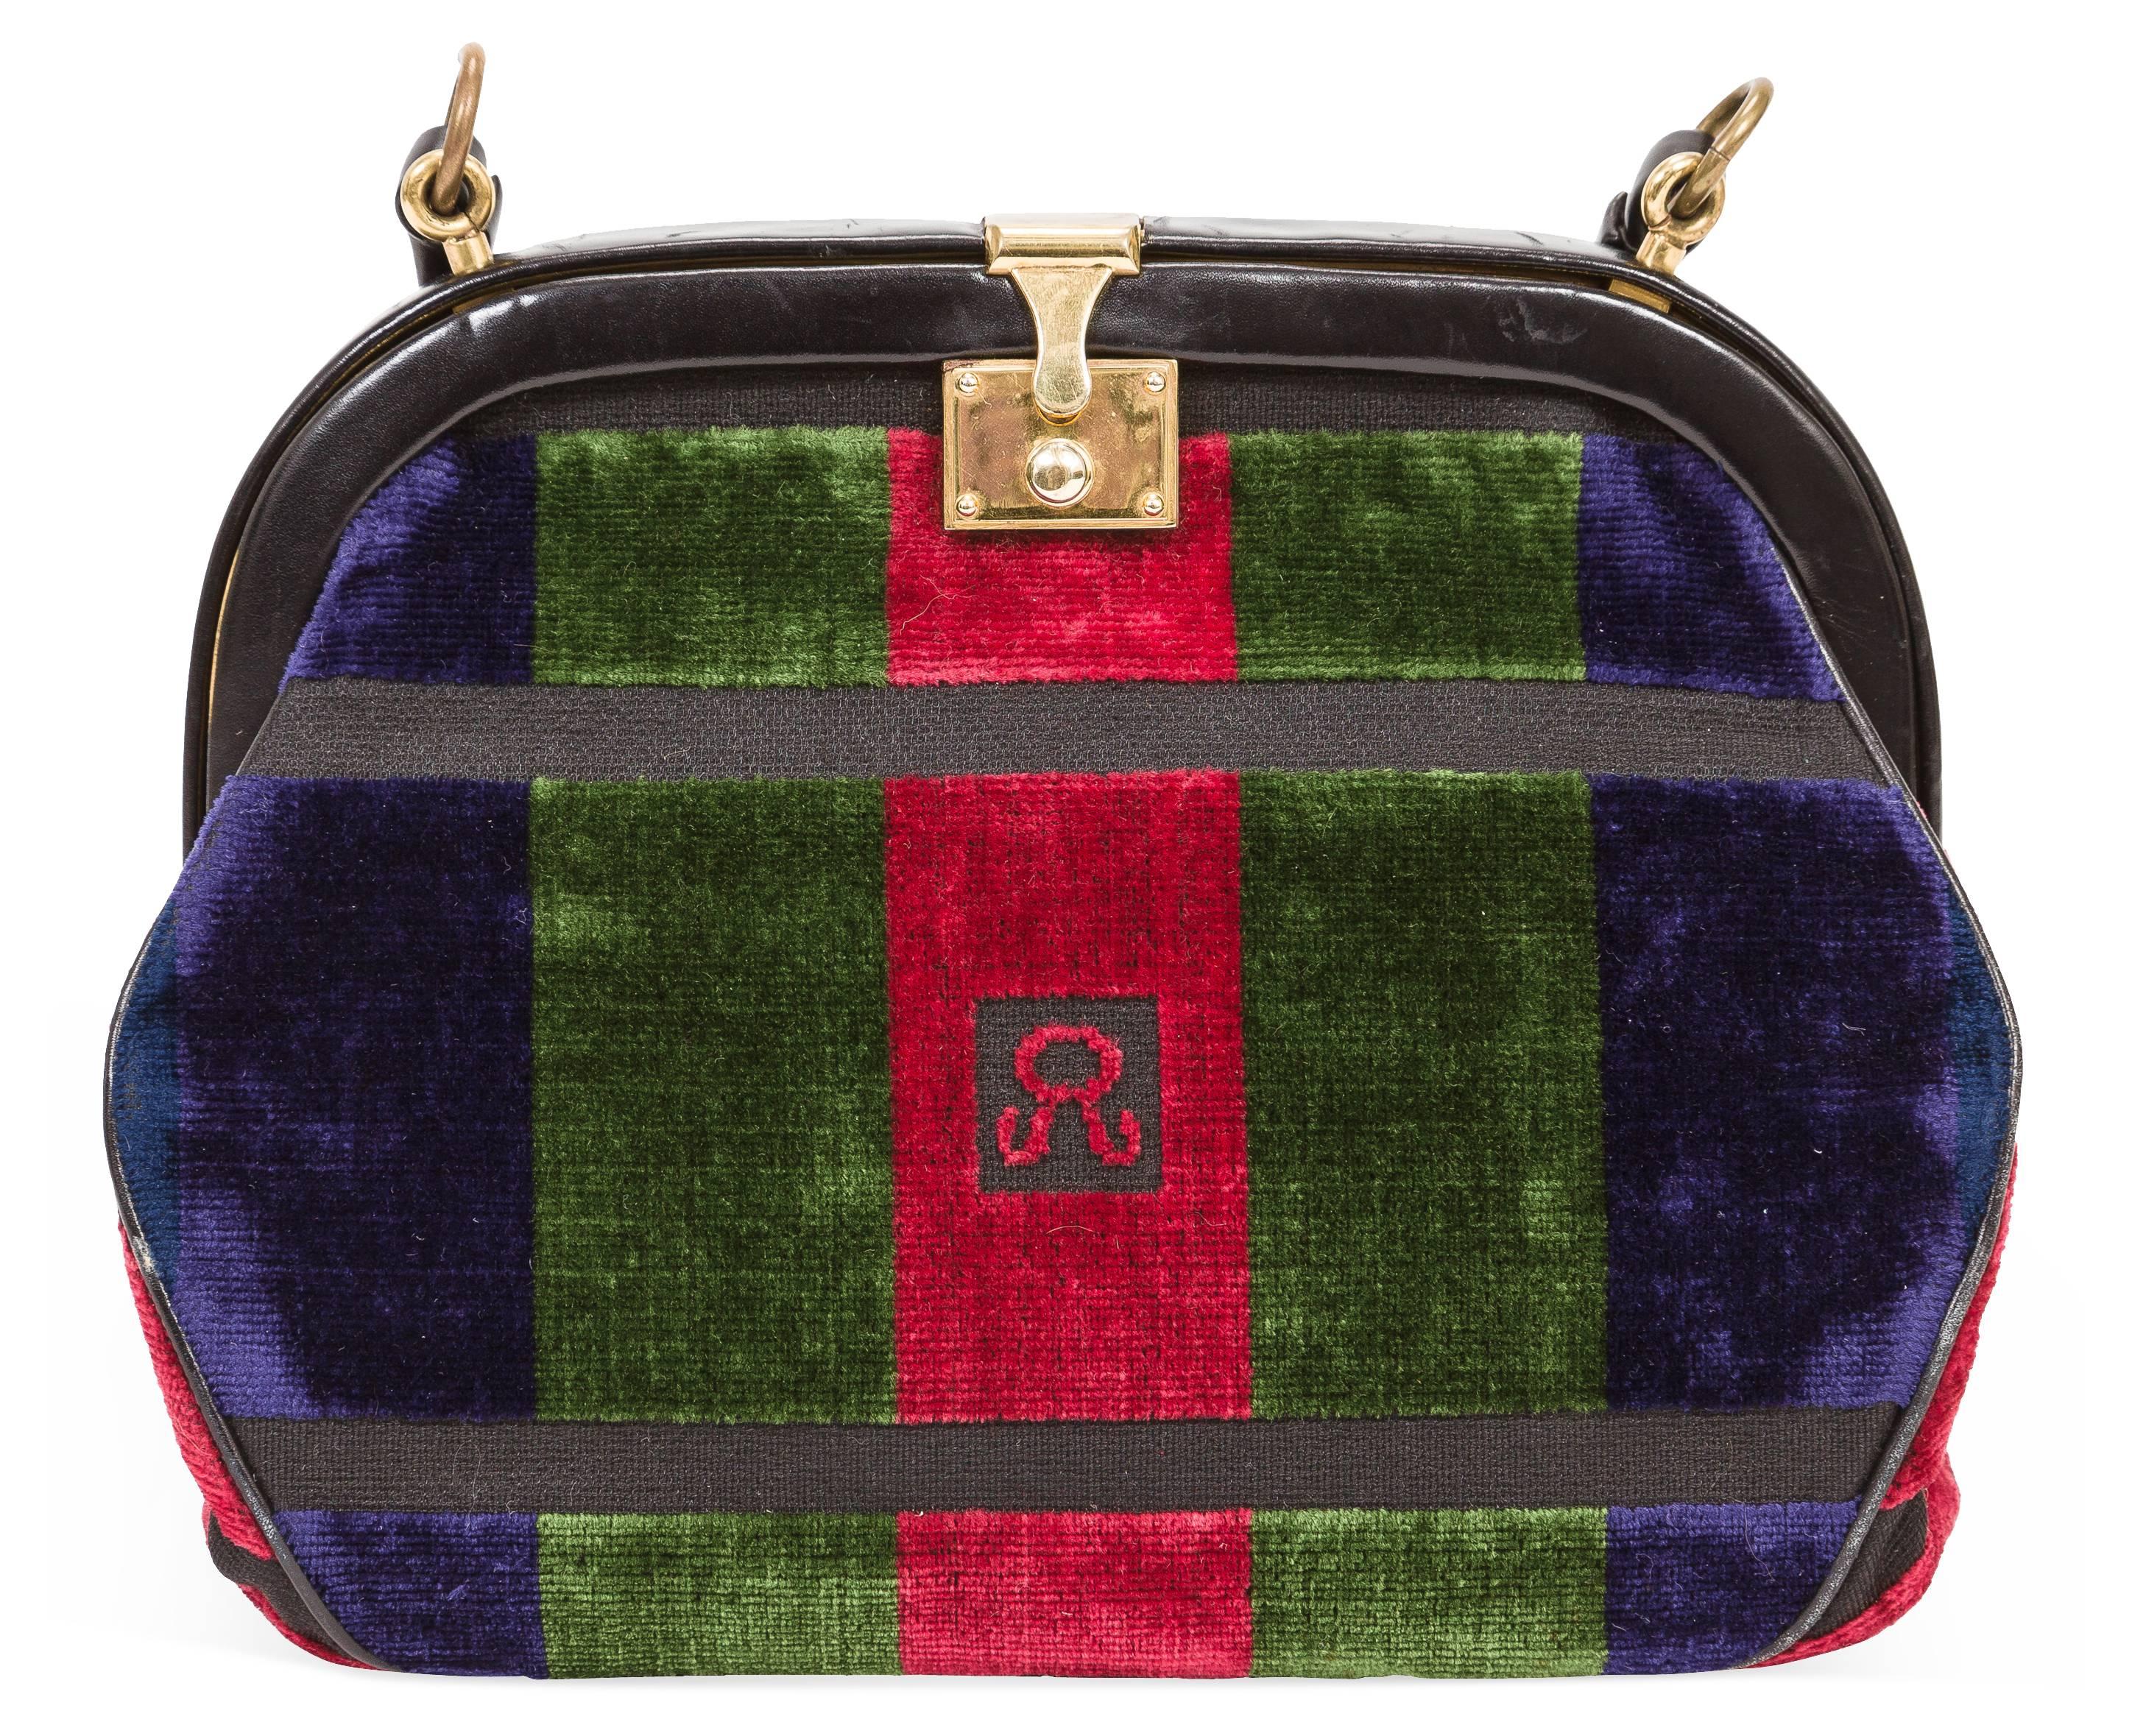 1970's Roberta di Camerino blue, green and red velvet mini carpet bag or leather trimmed gold frame purse with black leather handle and black leather interior featuring a zippered wall pocket. There are two stamps, "Roberta di Camerino" on